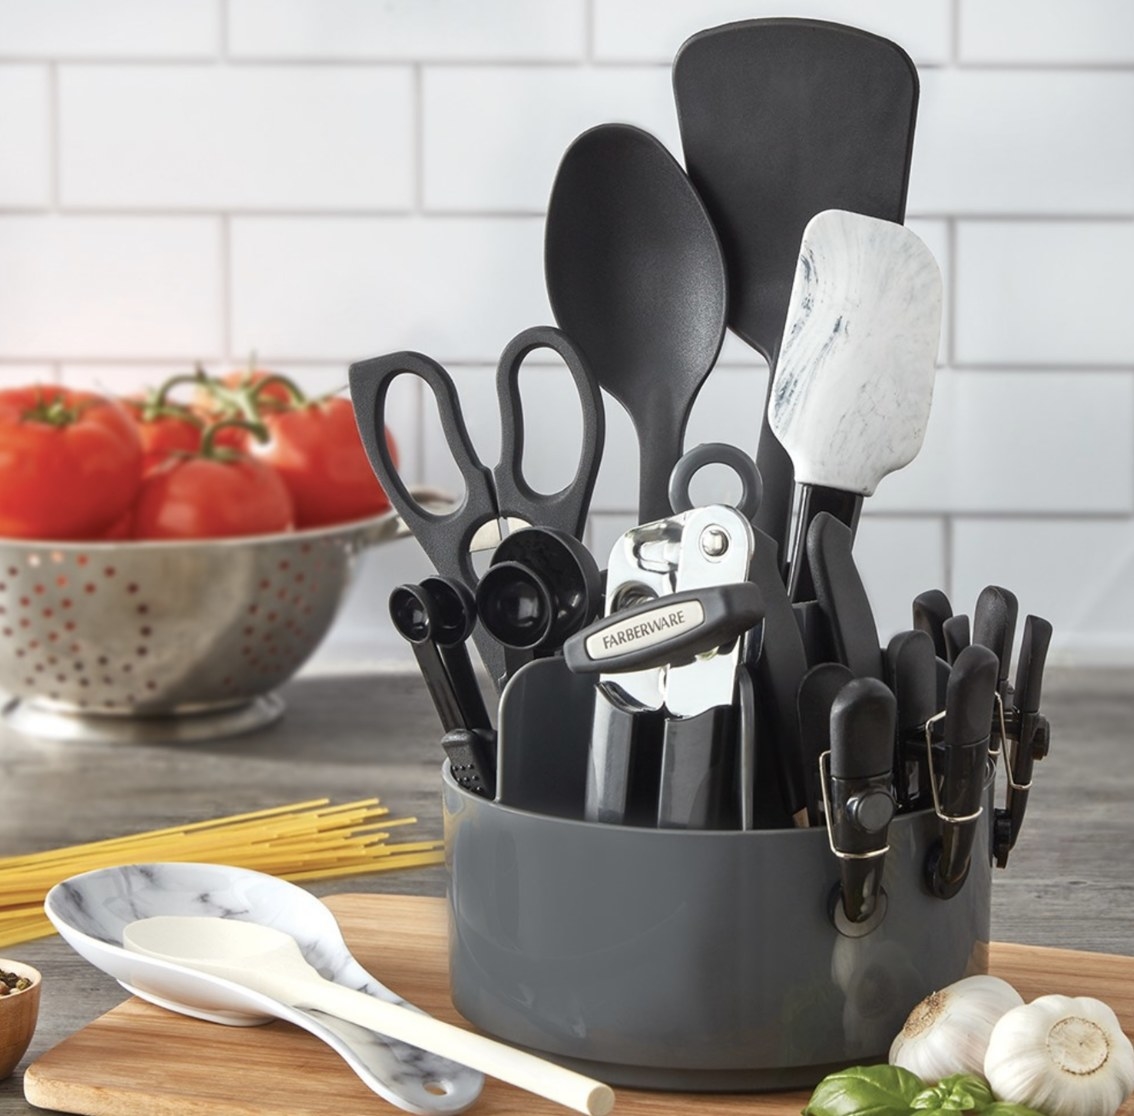 The black, stainless steel and marble set is on a countertop surrounded by pasta supplies